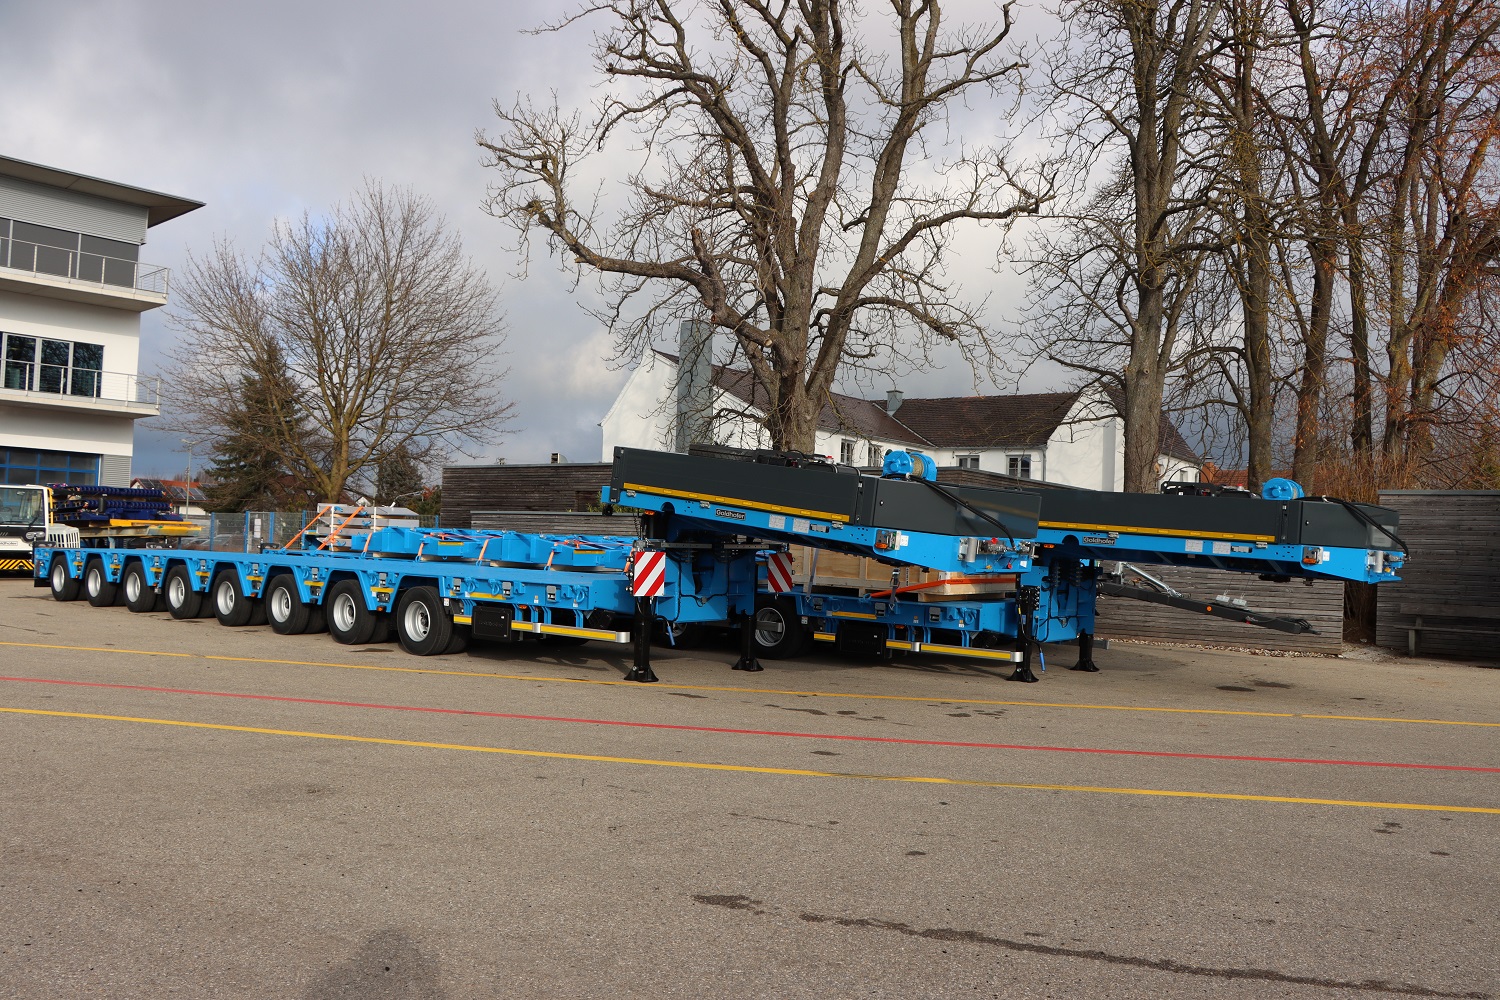 Delivery of the two MPA 8 semitrailers <br> Image source: Goldhofer Aktiengesellschaft